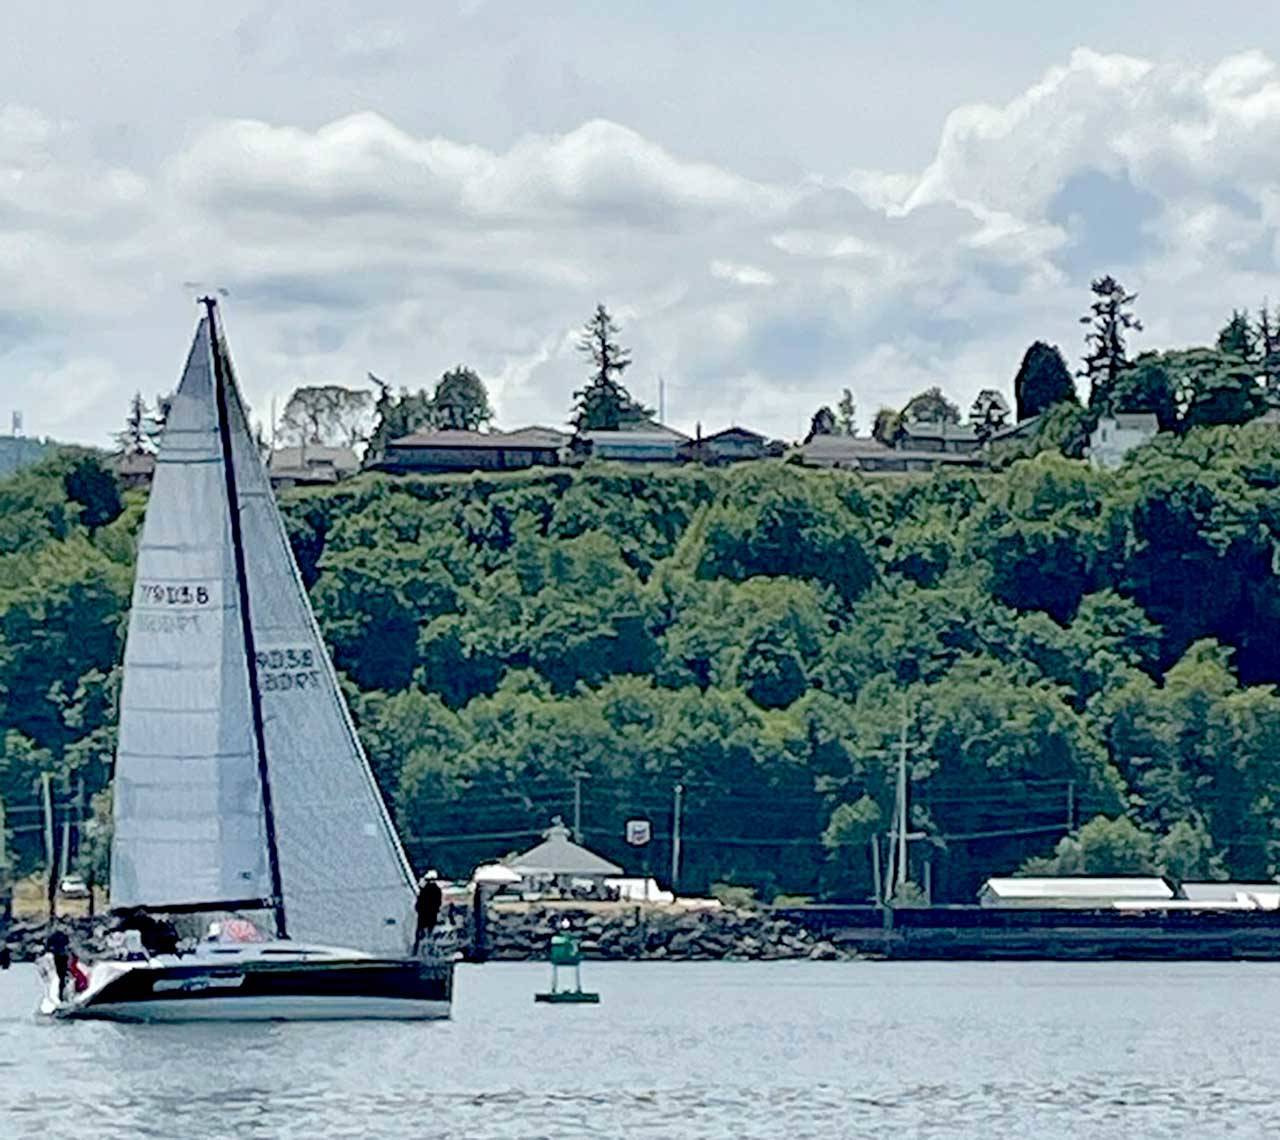 Gone with the Wind, with a Port Angeles crew, arrived first in the Performance Handicap Racing Fleet (PHRF) B class in the Pacific Northwest Offshore Yacht Race. (Rebecca Close)